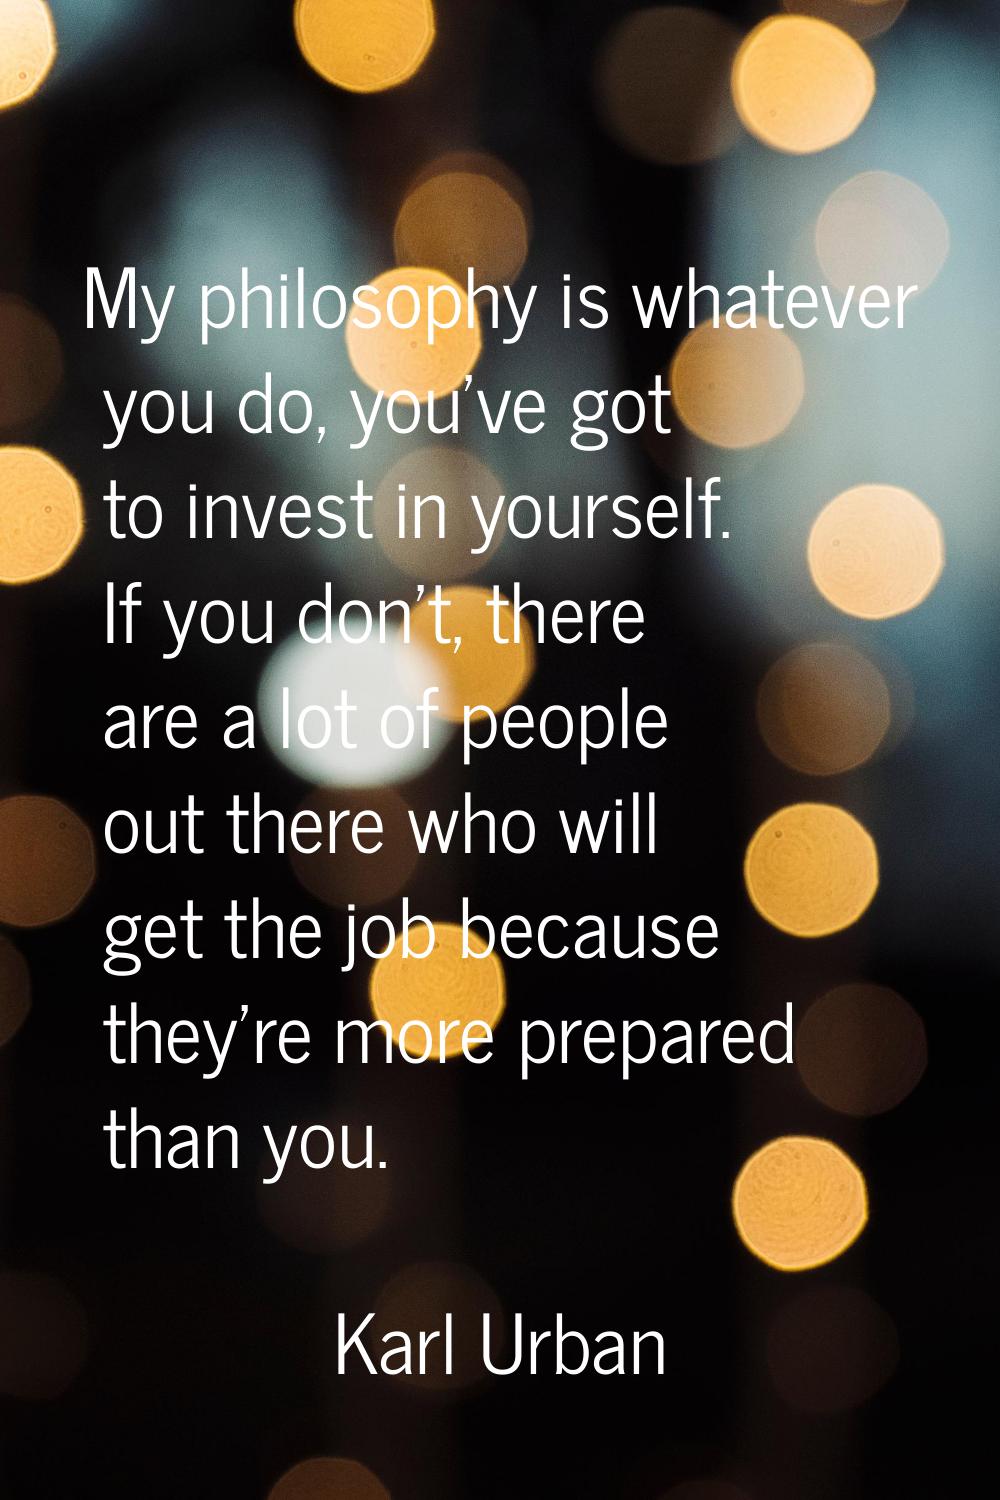 My philosophy is whatever you do, you've got to invest in yourself. If you don't, there are a lot o